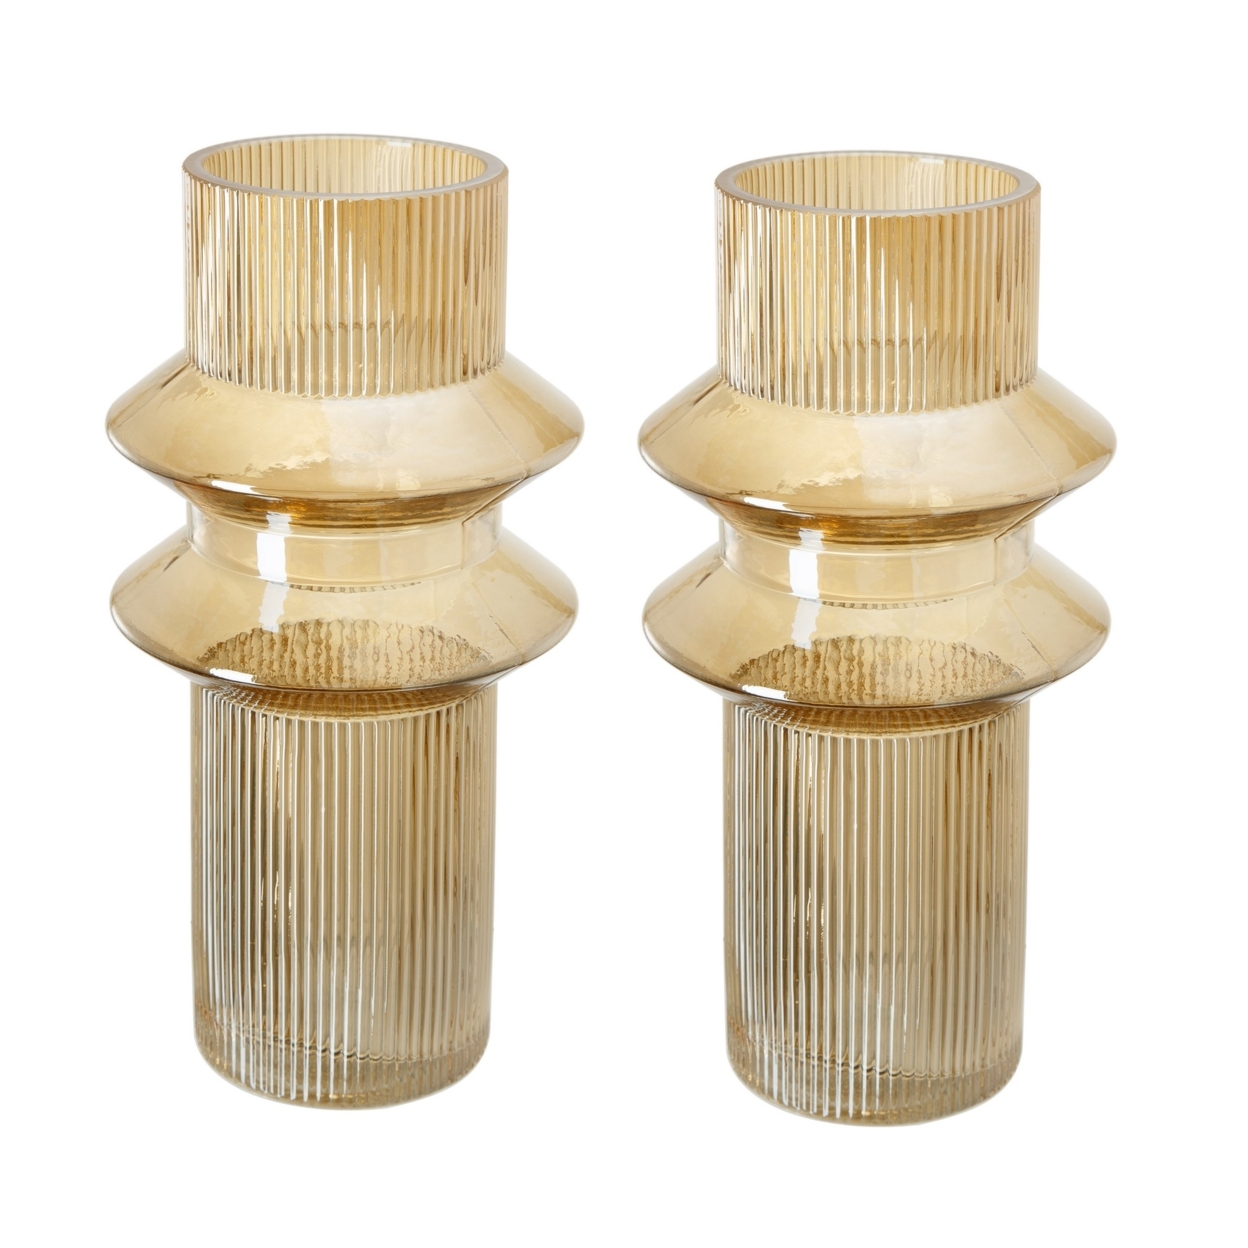 Rae Set Of 2 Glass Vases, Tall Round Cylinders, Amber Yellow, Clear Finish- Saltoro Sherpi